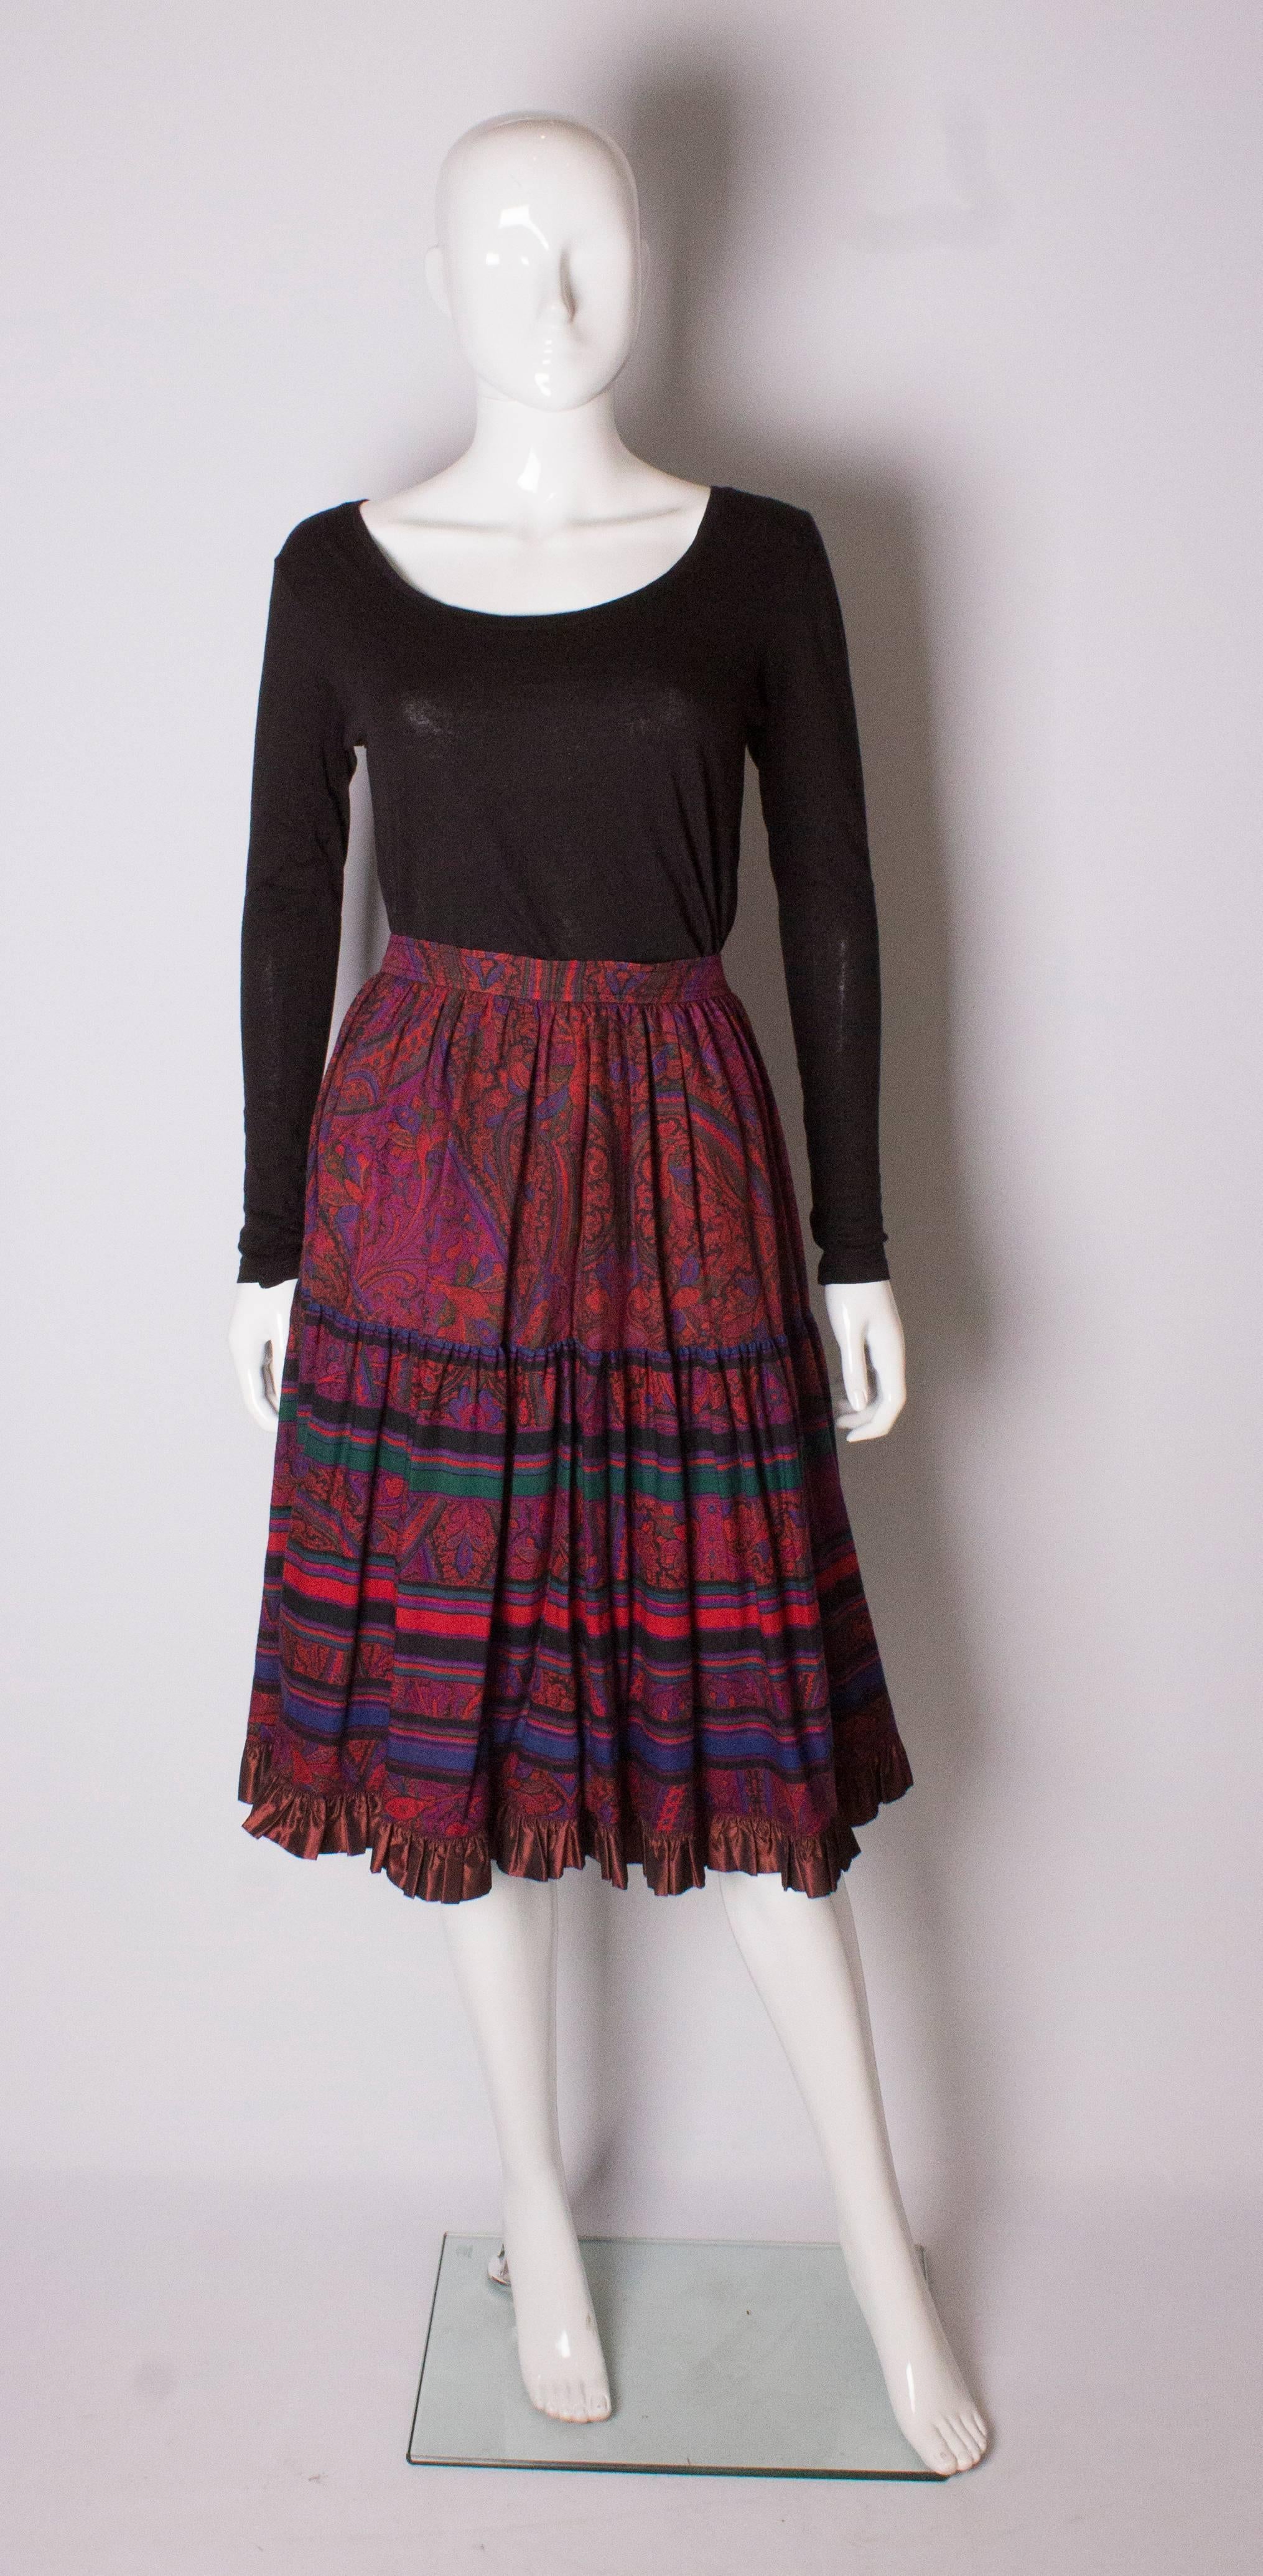 Yves Saint Laurent Rive Gauche paisley print skirt in a wonderful colour palete of pinks and and purples.The skirt has one pocket on either side and a satin frill at the hem.